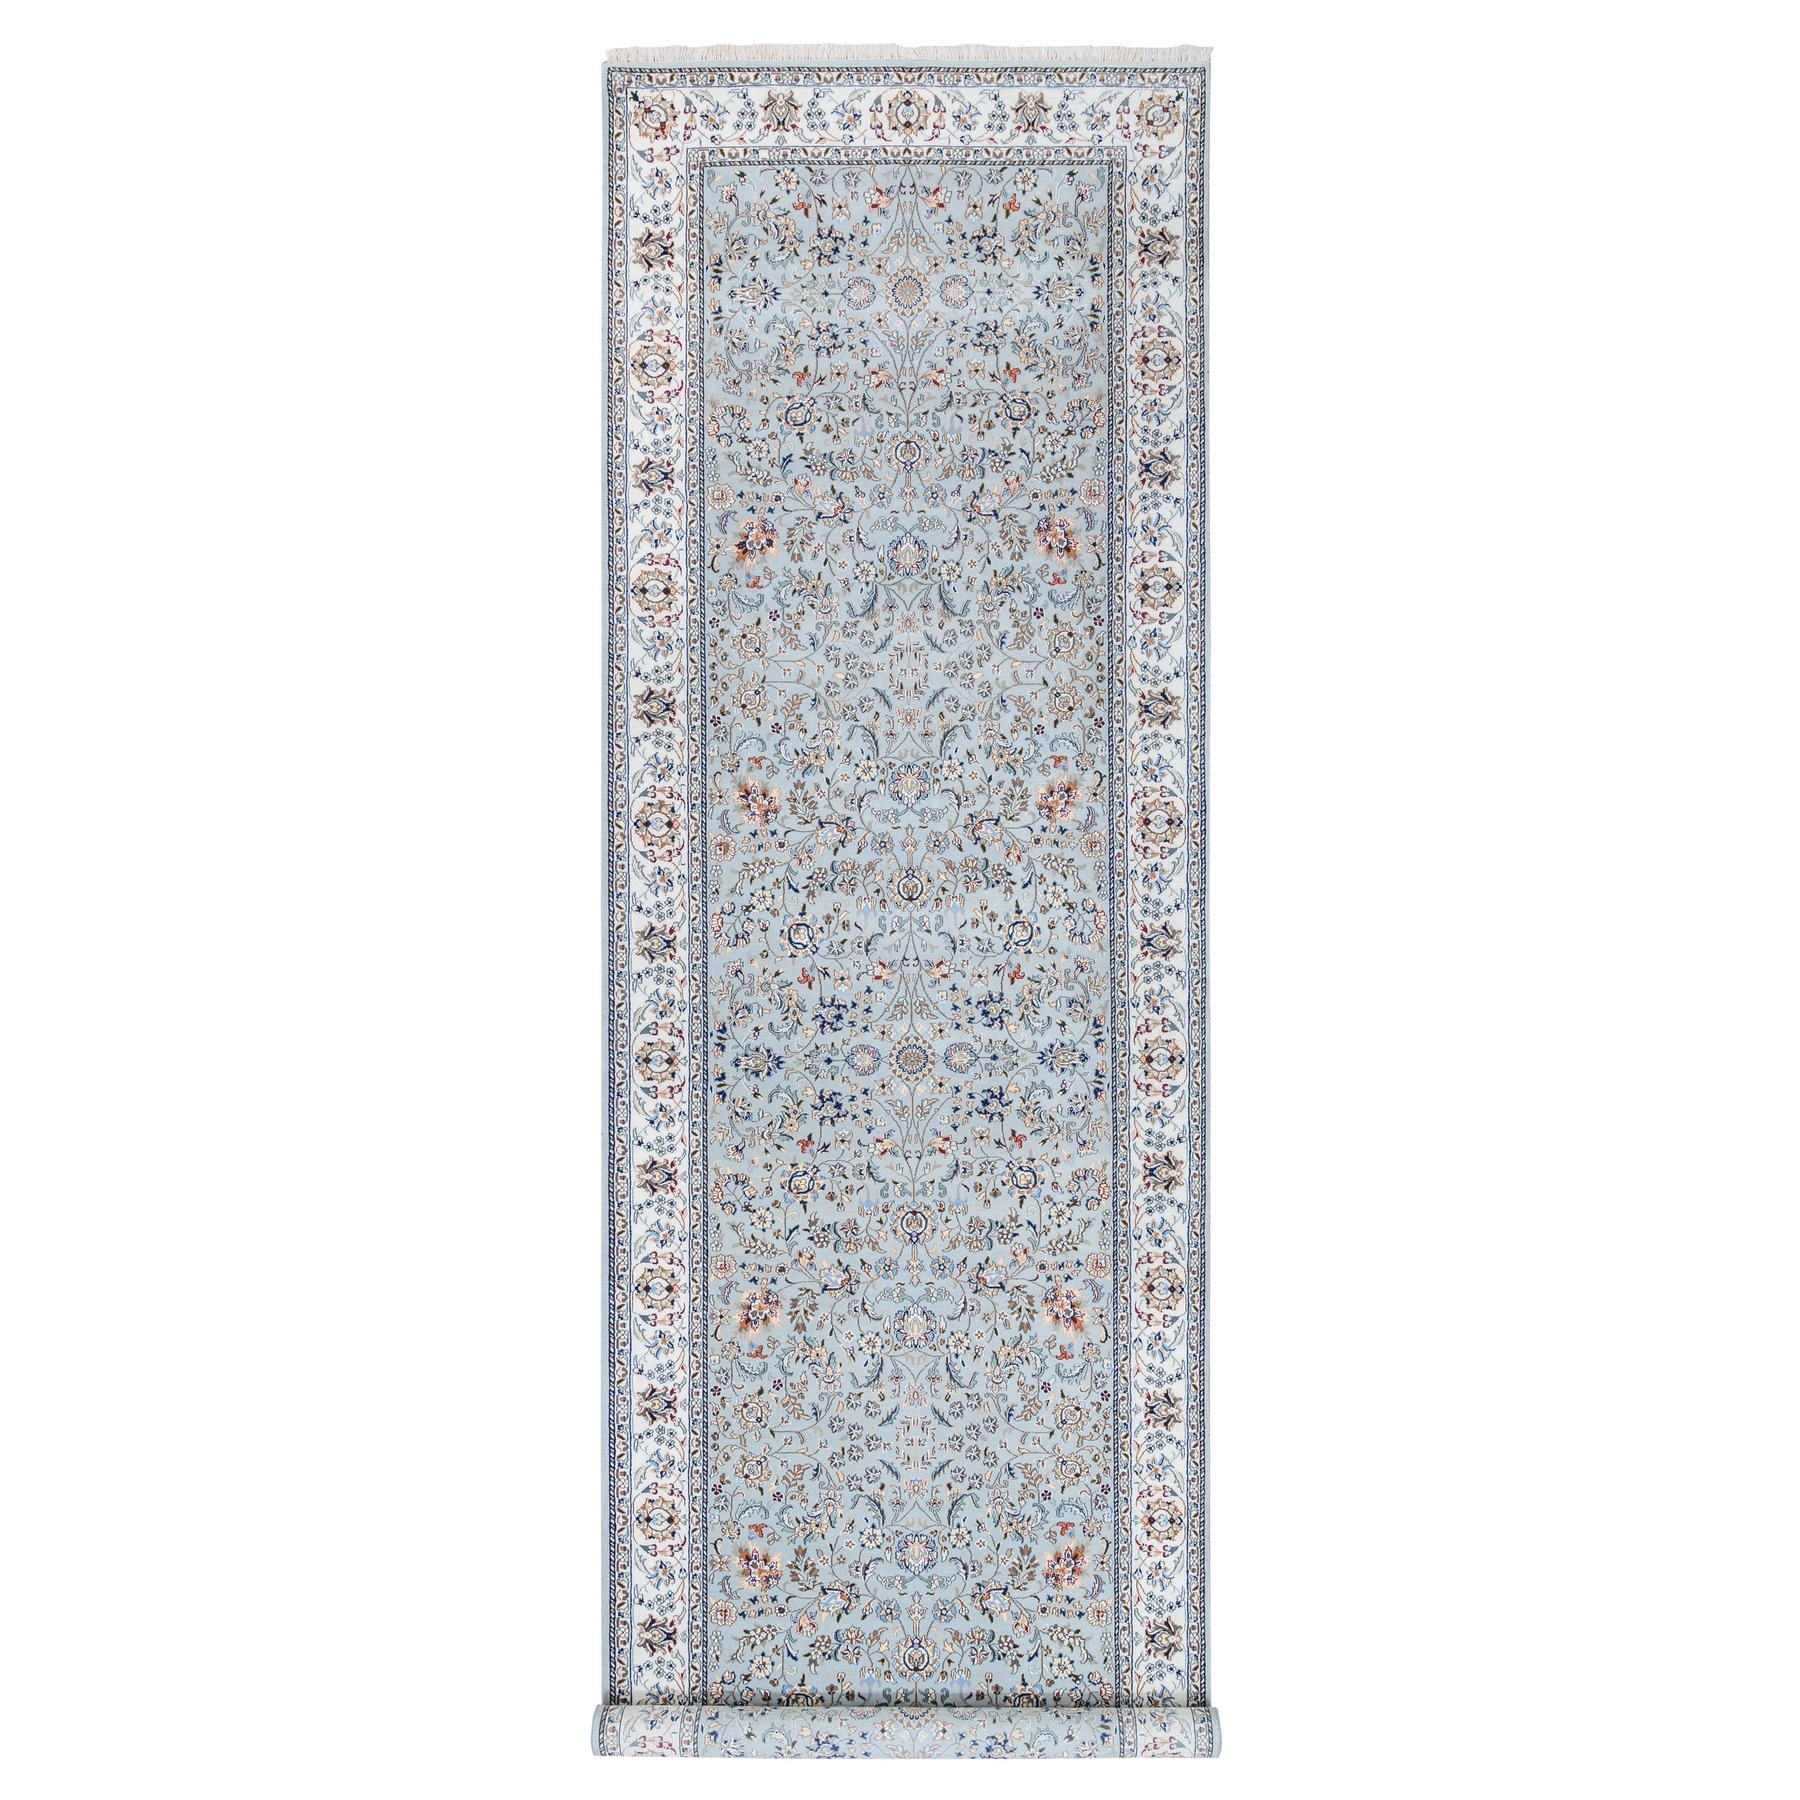 Pirniakan Collection Hand Stitched Grey Rug No: 1124694